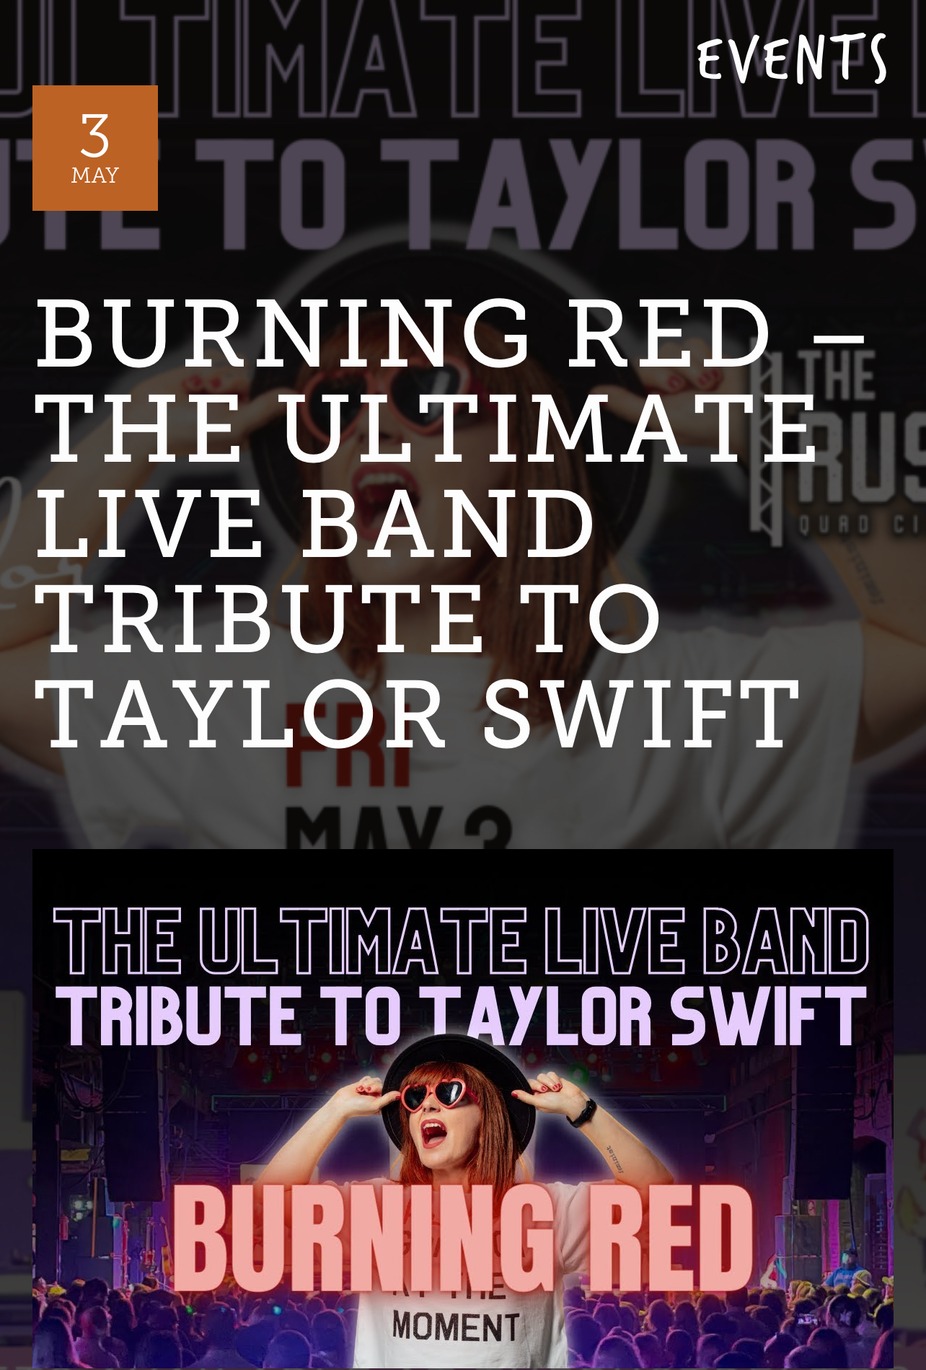 Burning Red tribute to Taylor Swift event photo